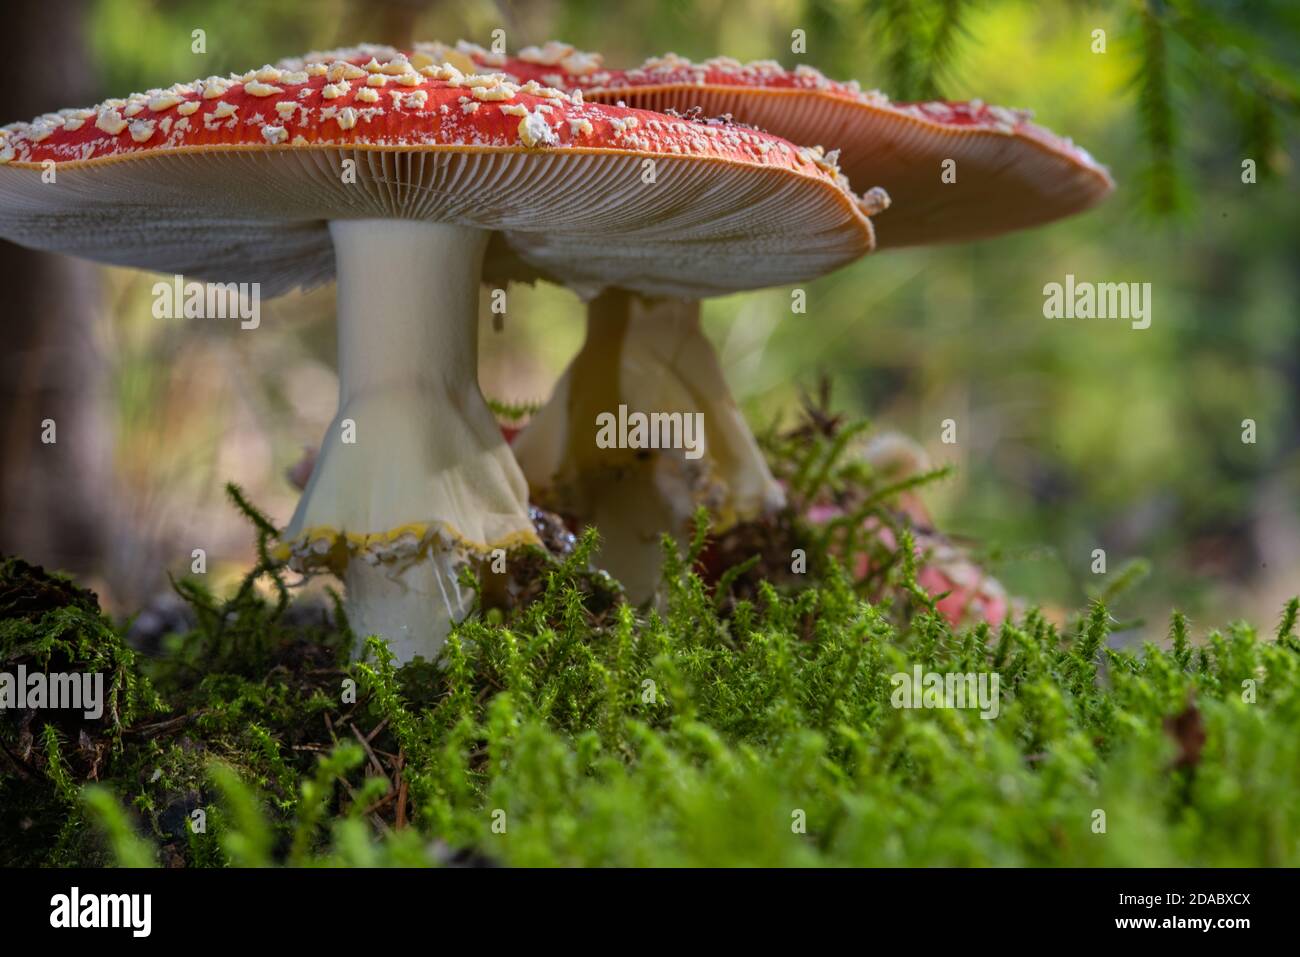 Close-up of a fly agaric group in woodland. Verry deep camera position looks out from under the mushroom hats. Stock Photo